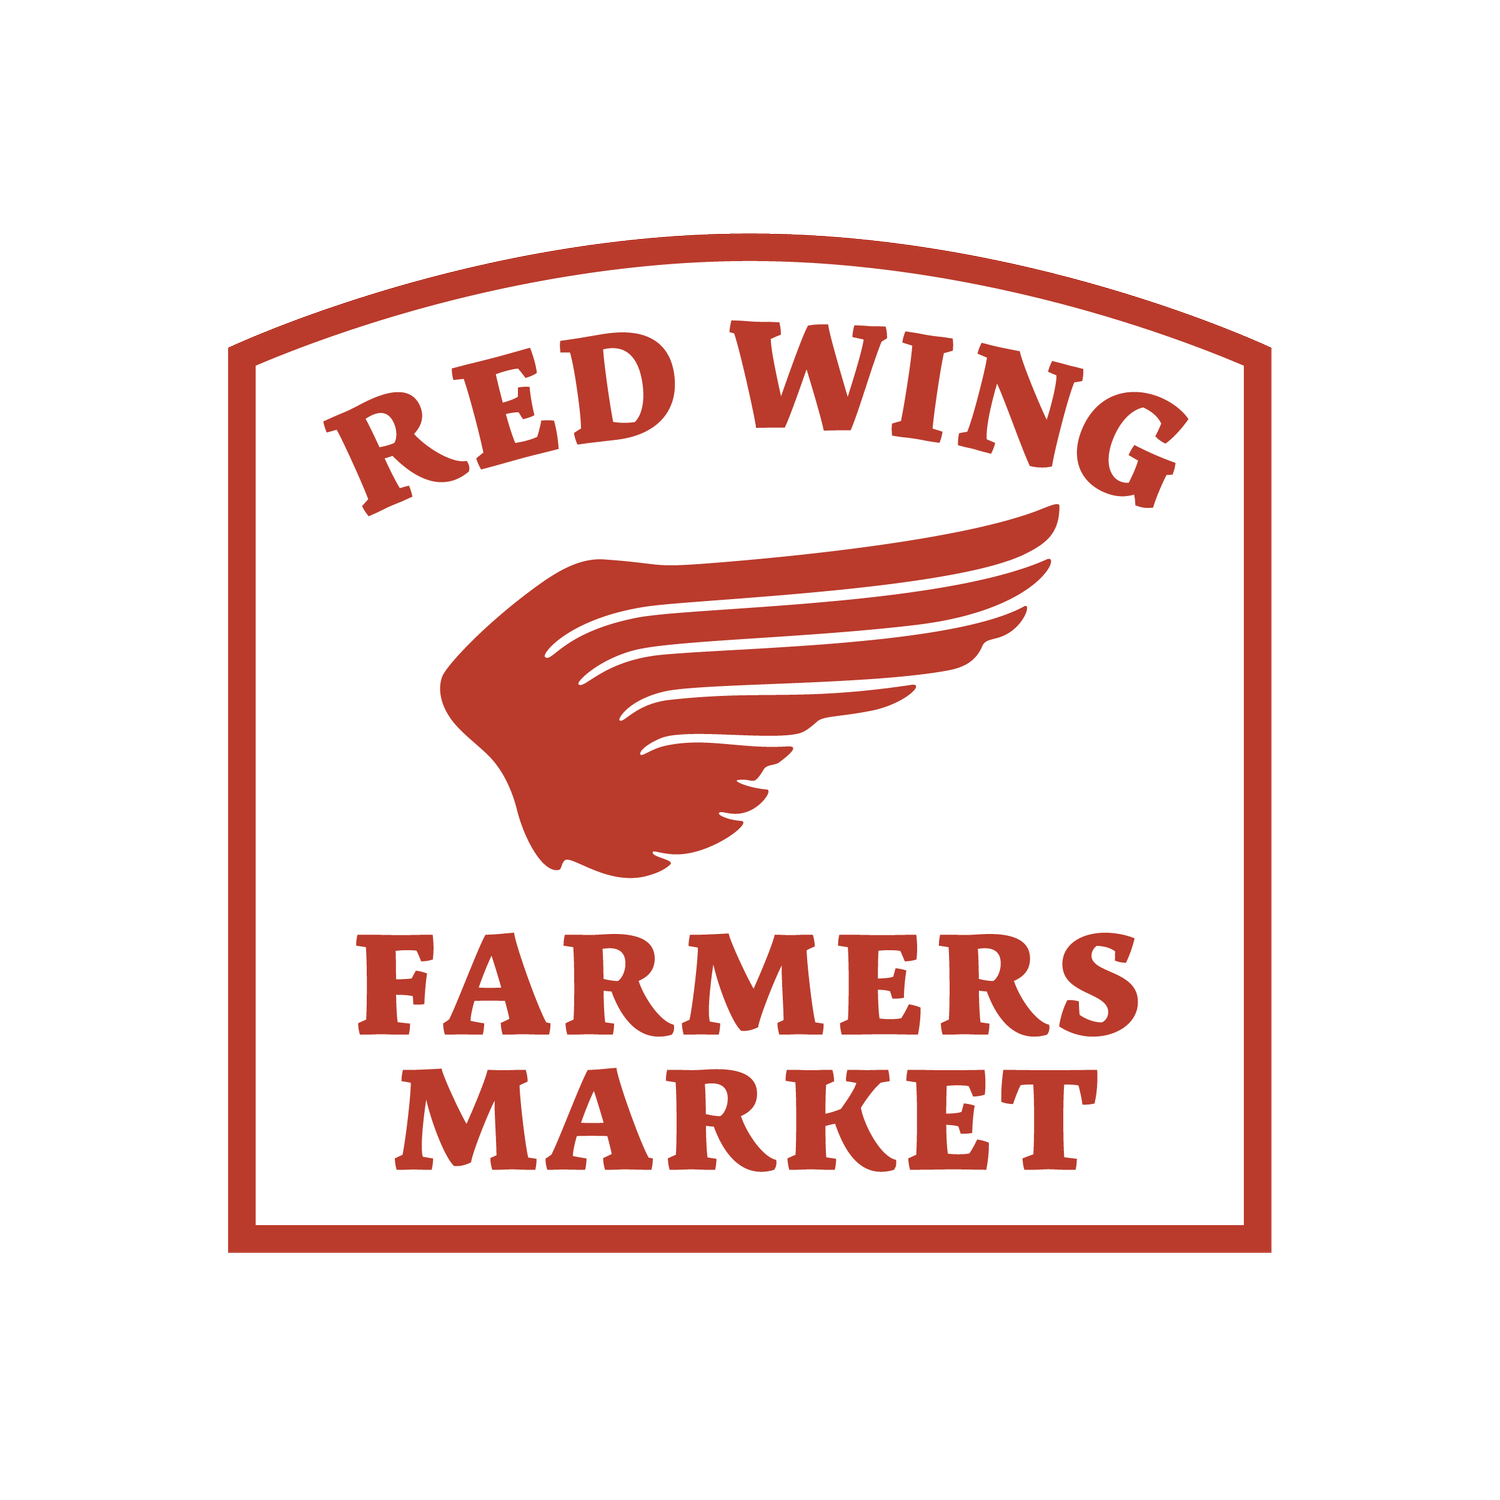 Red Wing Farmers Market